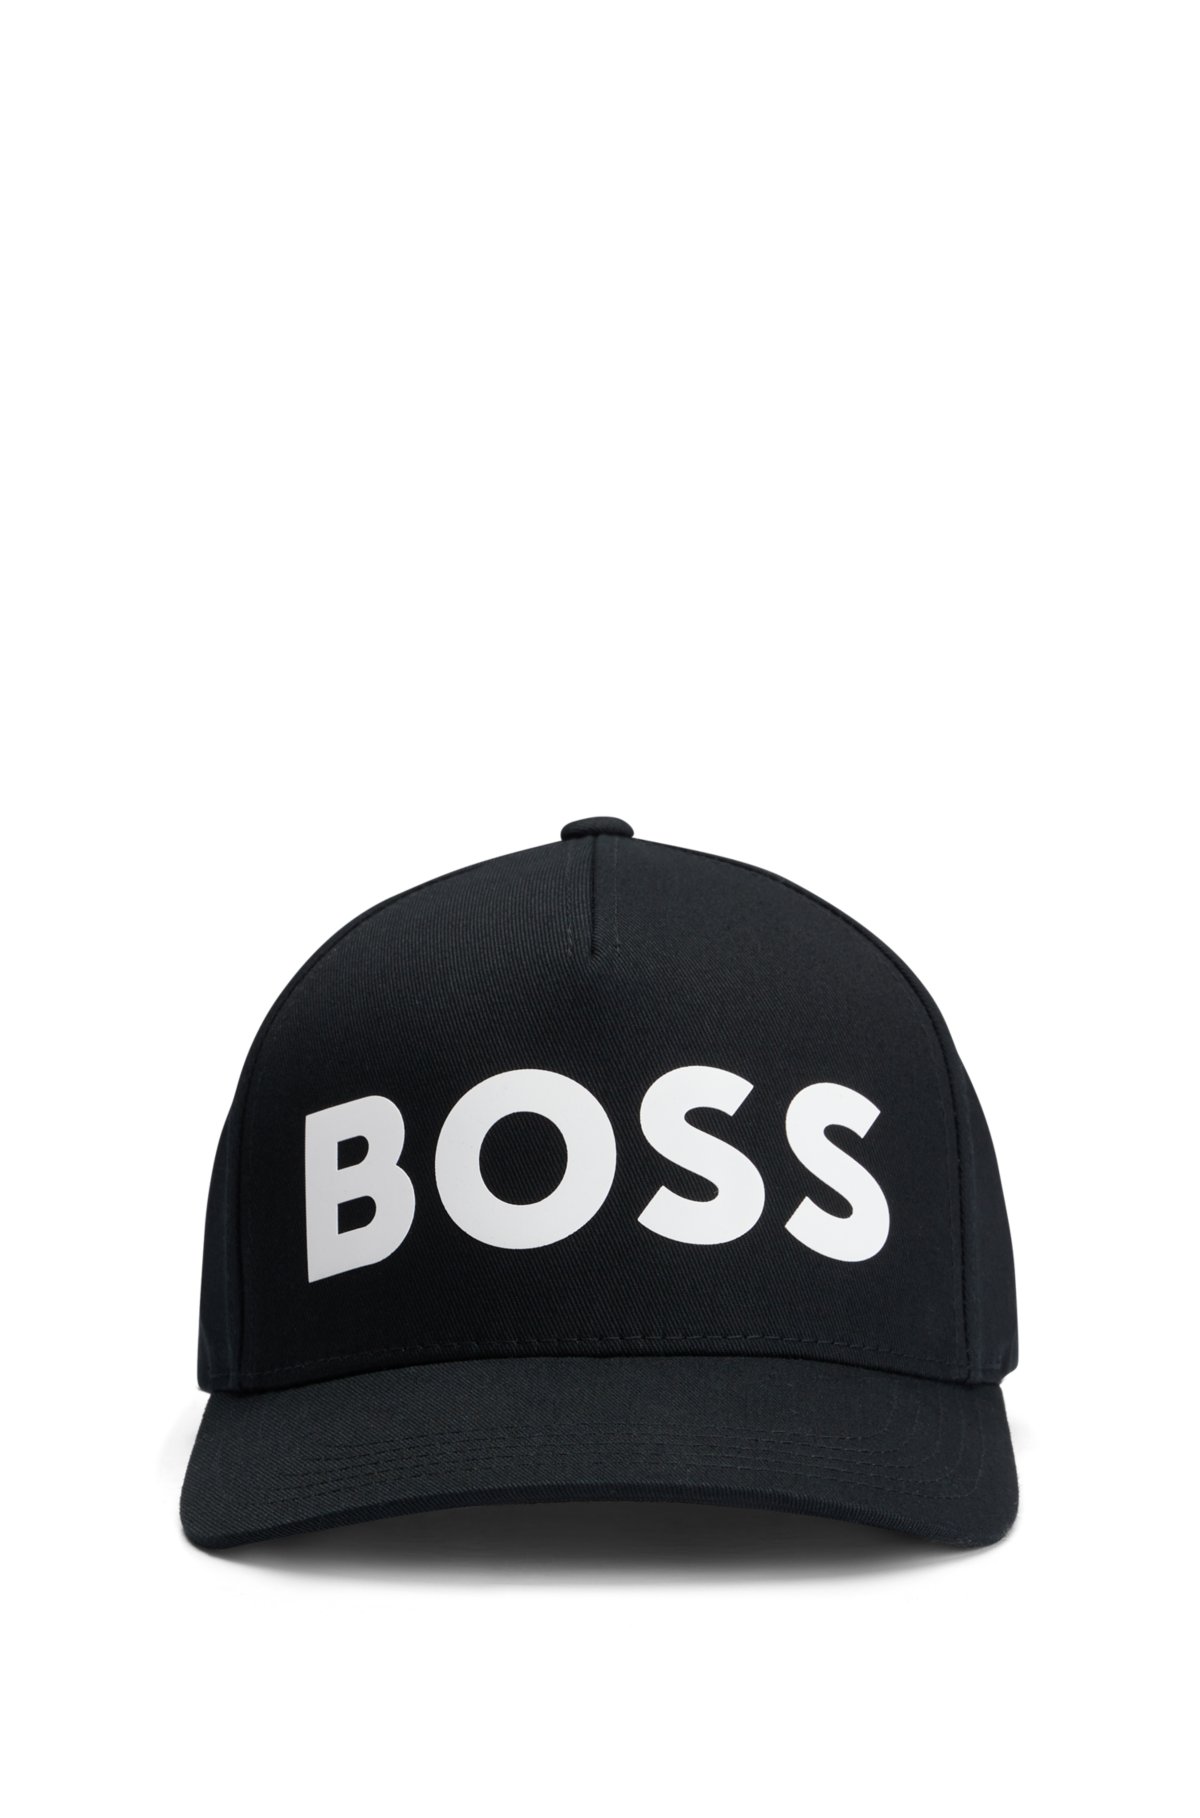 BOSS - Cotton-piqué cap signature logo and with contrast tape